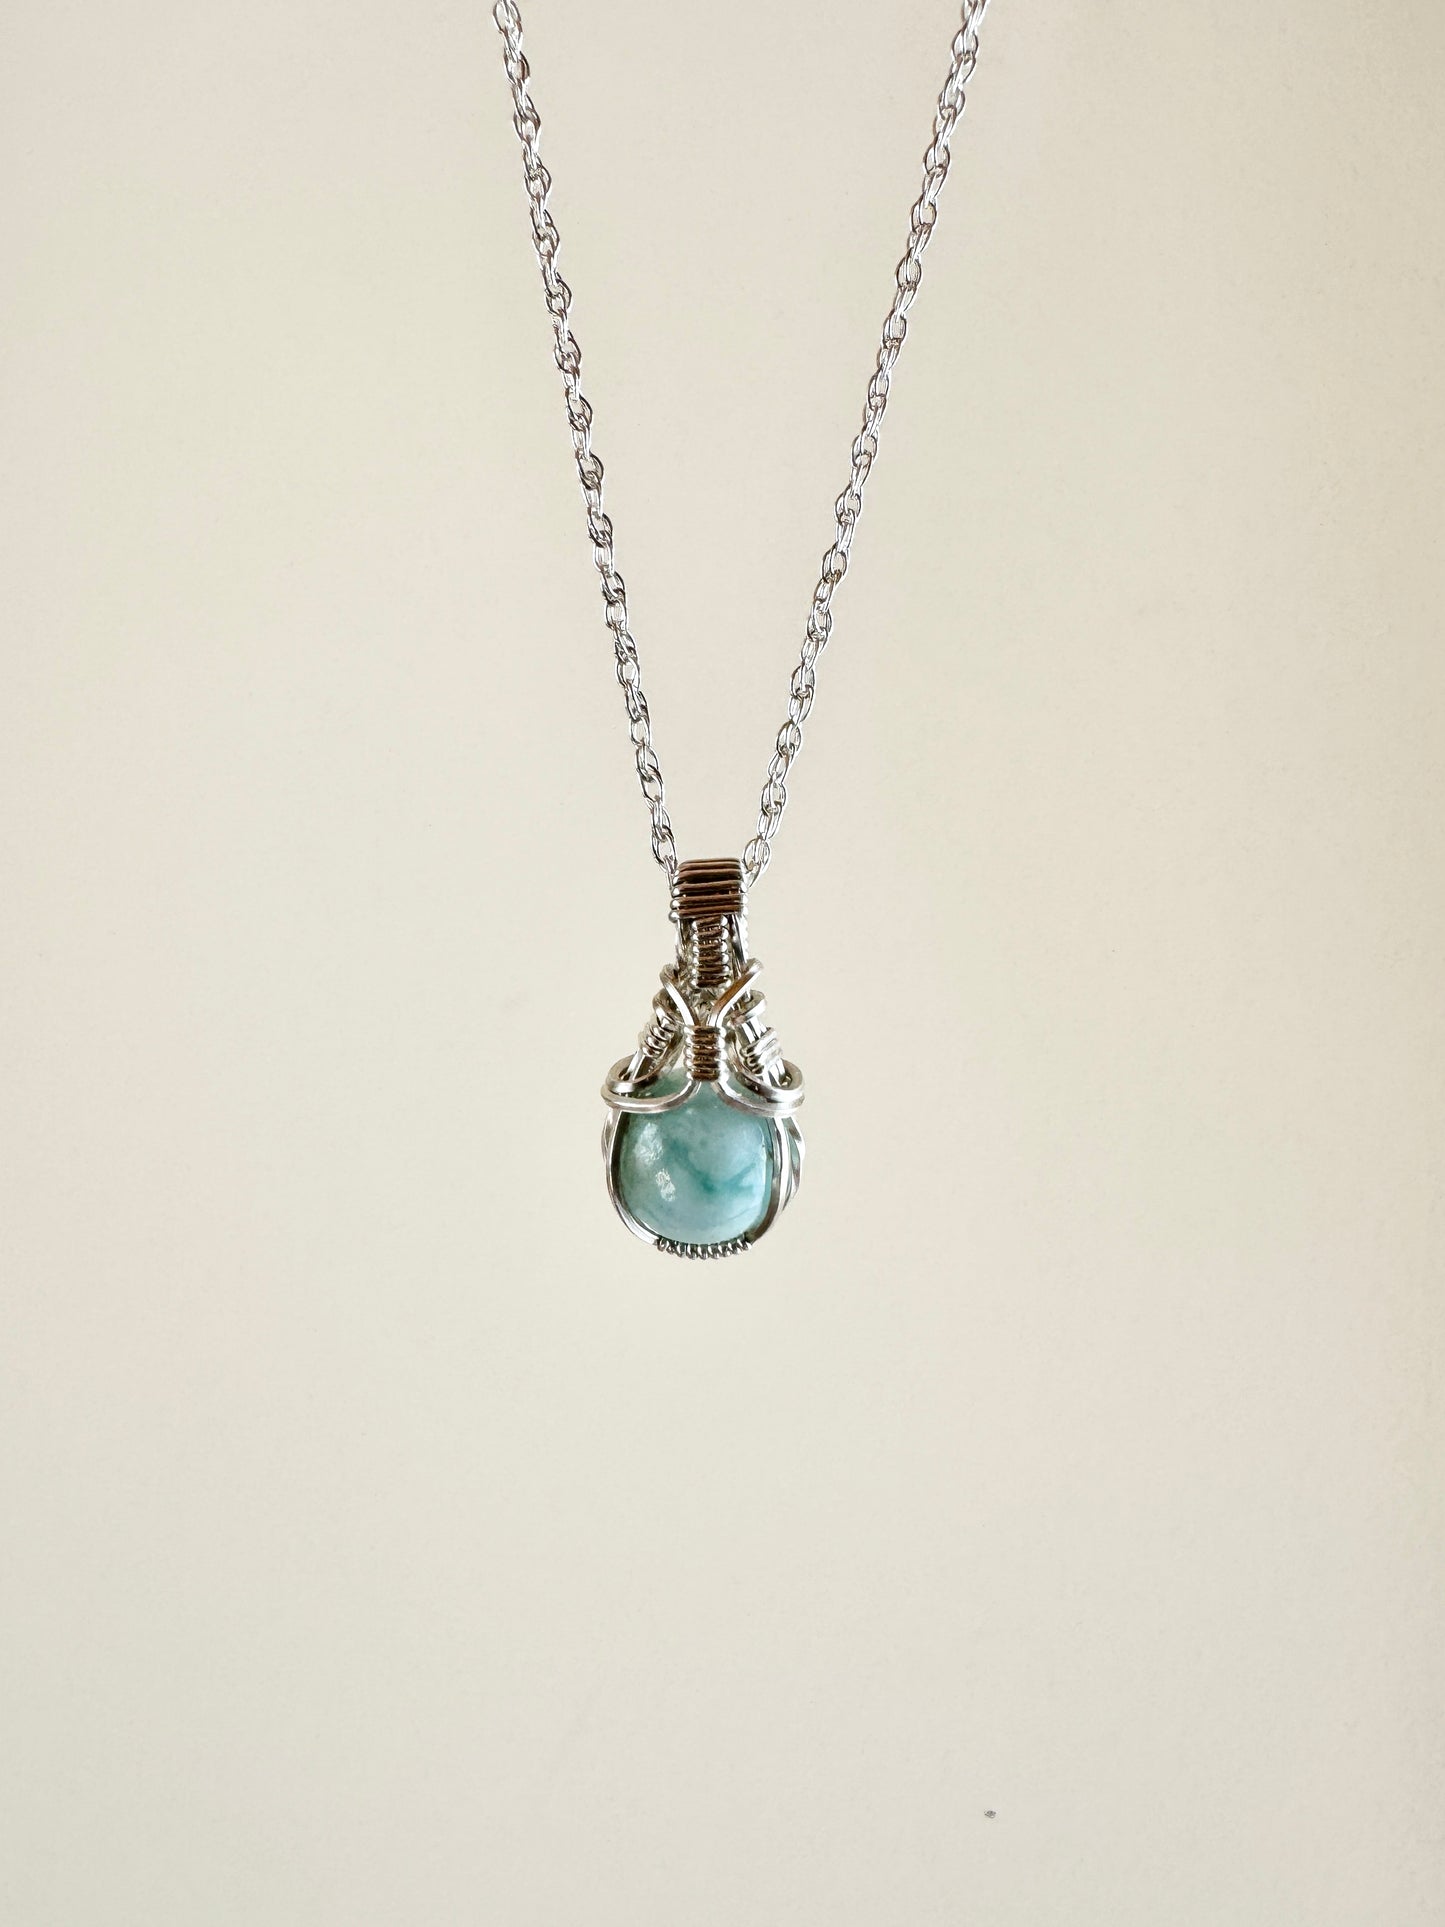 Larimar “Dolphin Stone” Wire Wrapped Necklace in .925 Sterling Silver